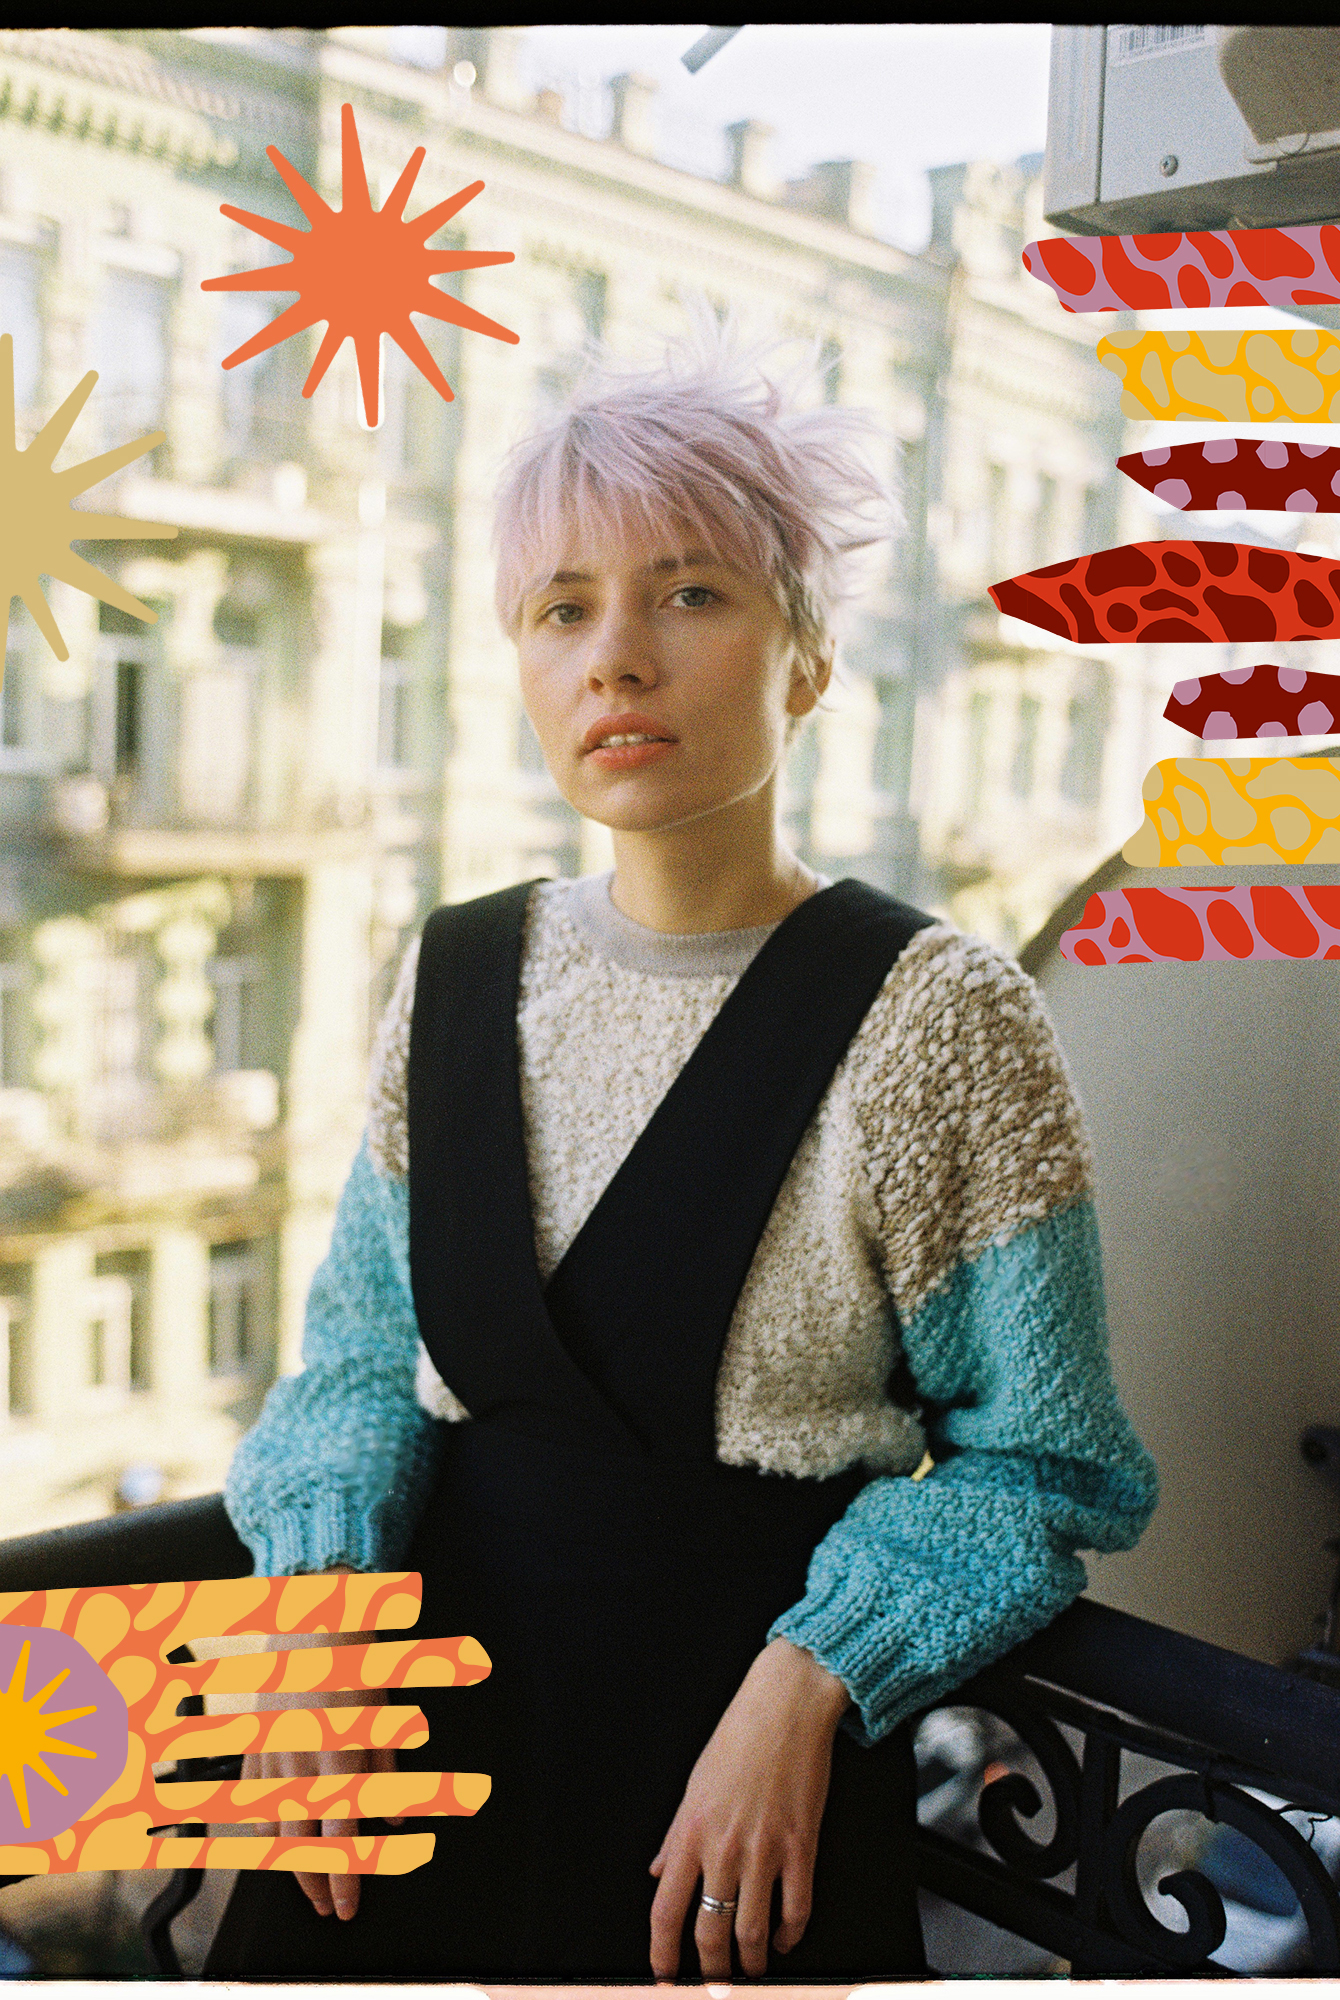 Introducing: Kate NV depicts everyday life in Moscow through otherworldly, playful electronica